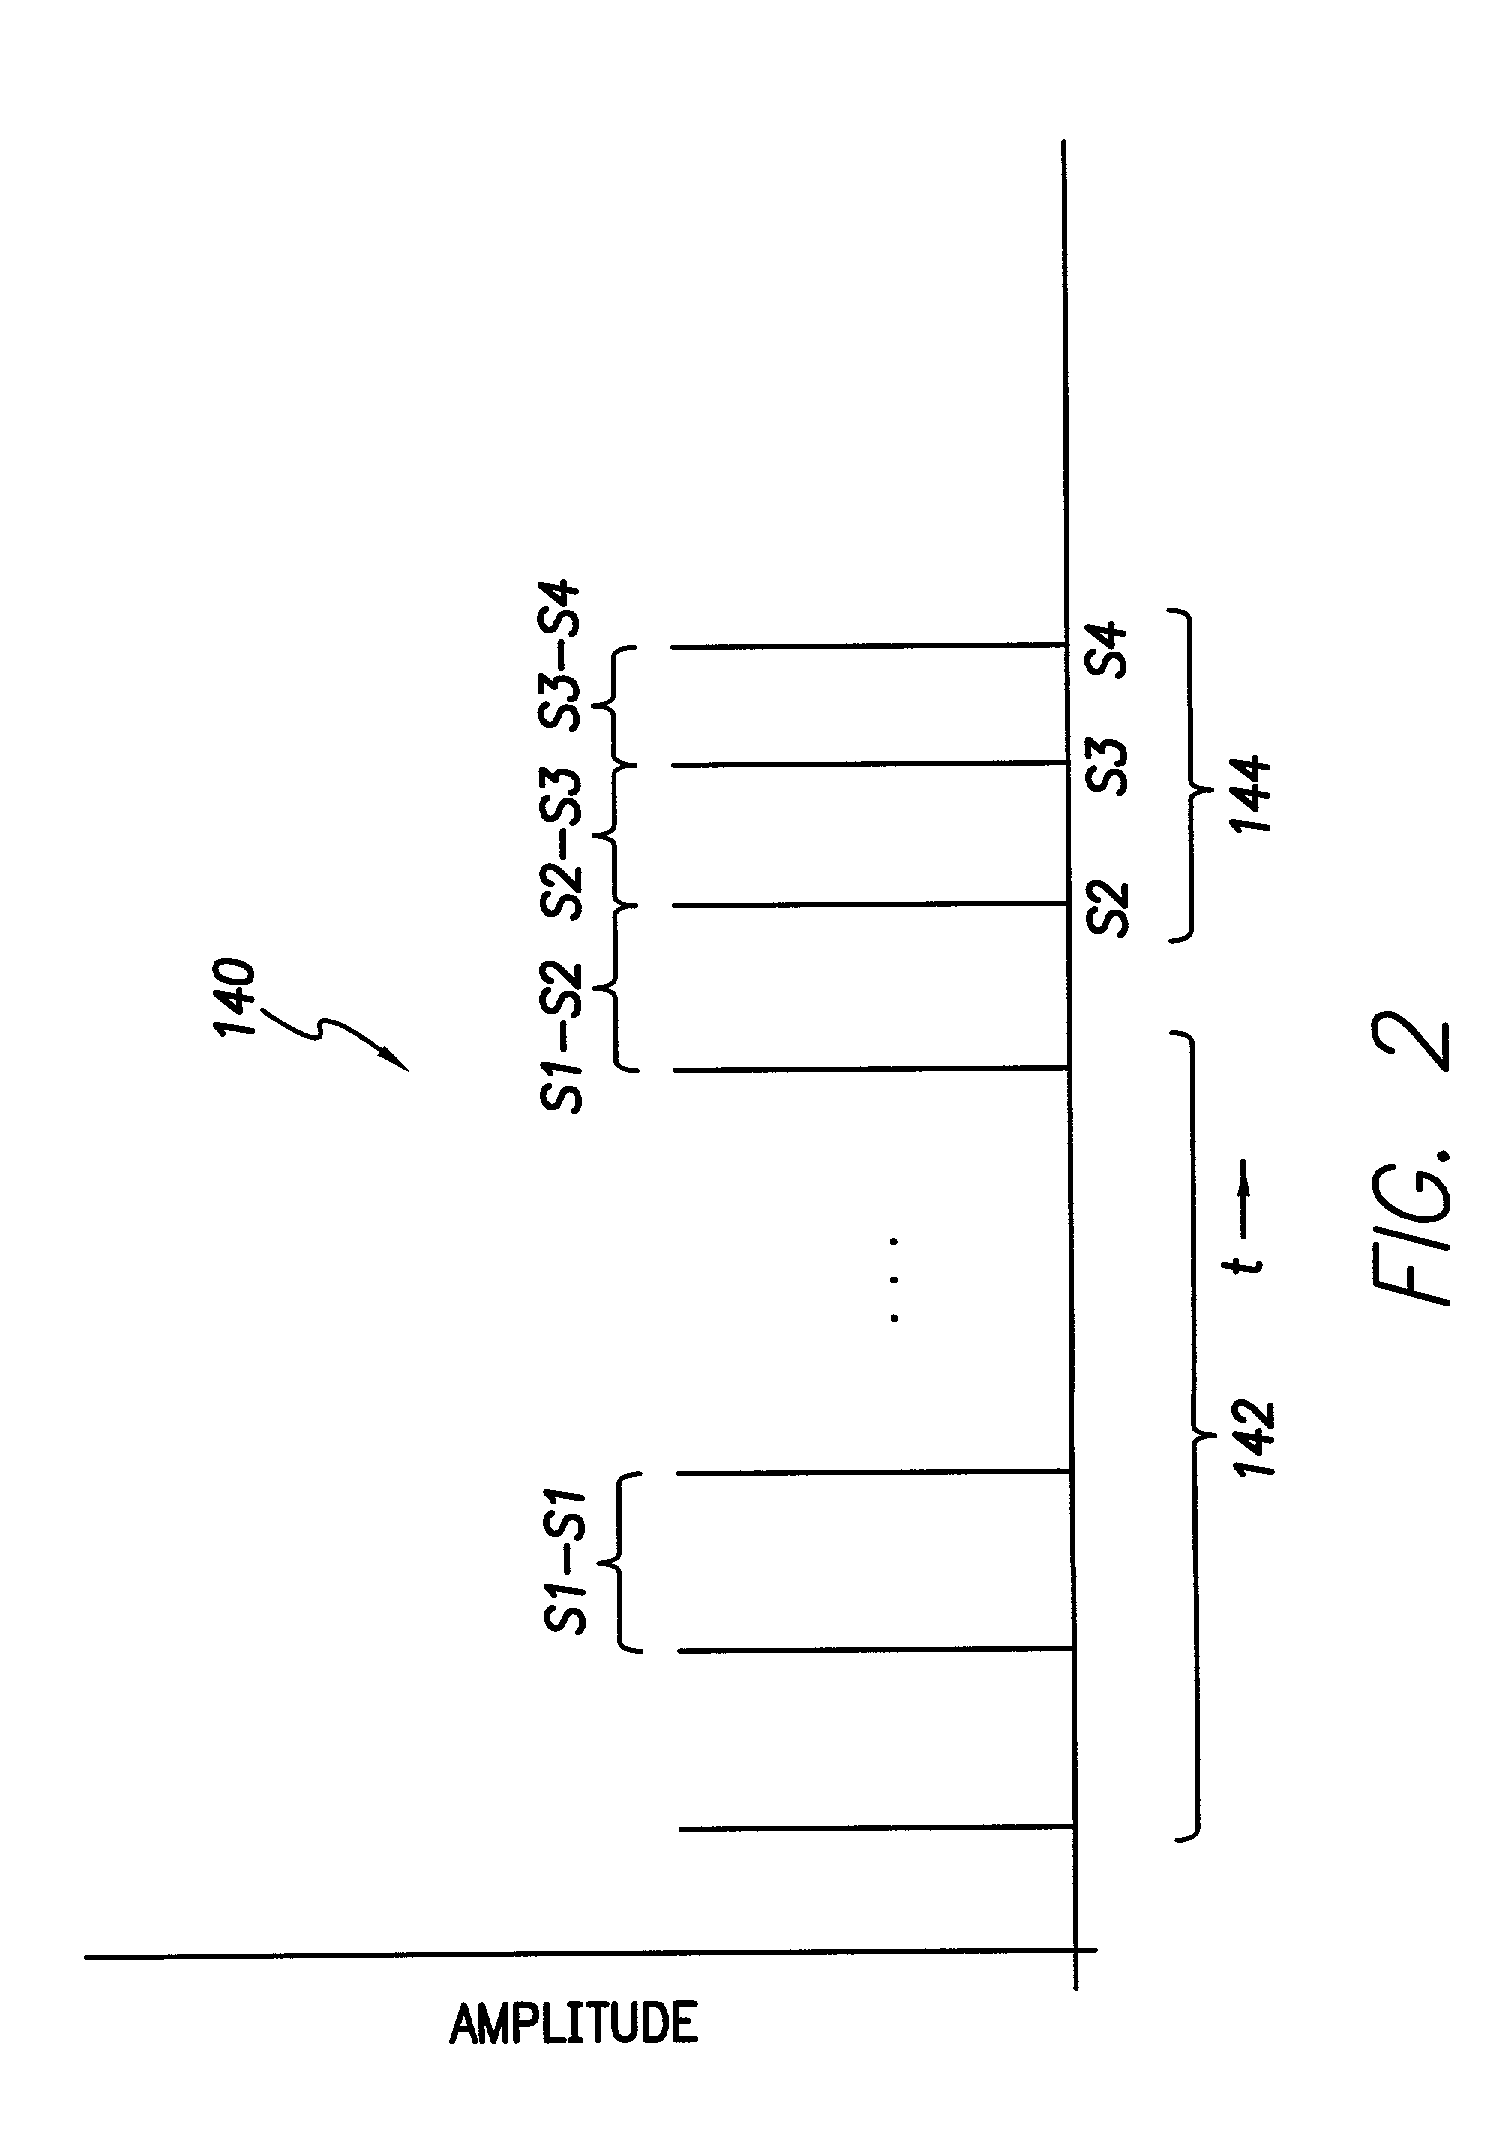 Implantable cardiac stimulation device including a system for and method of automatically inducing a tachyarrhythmia